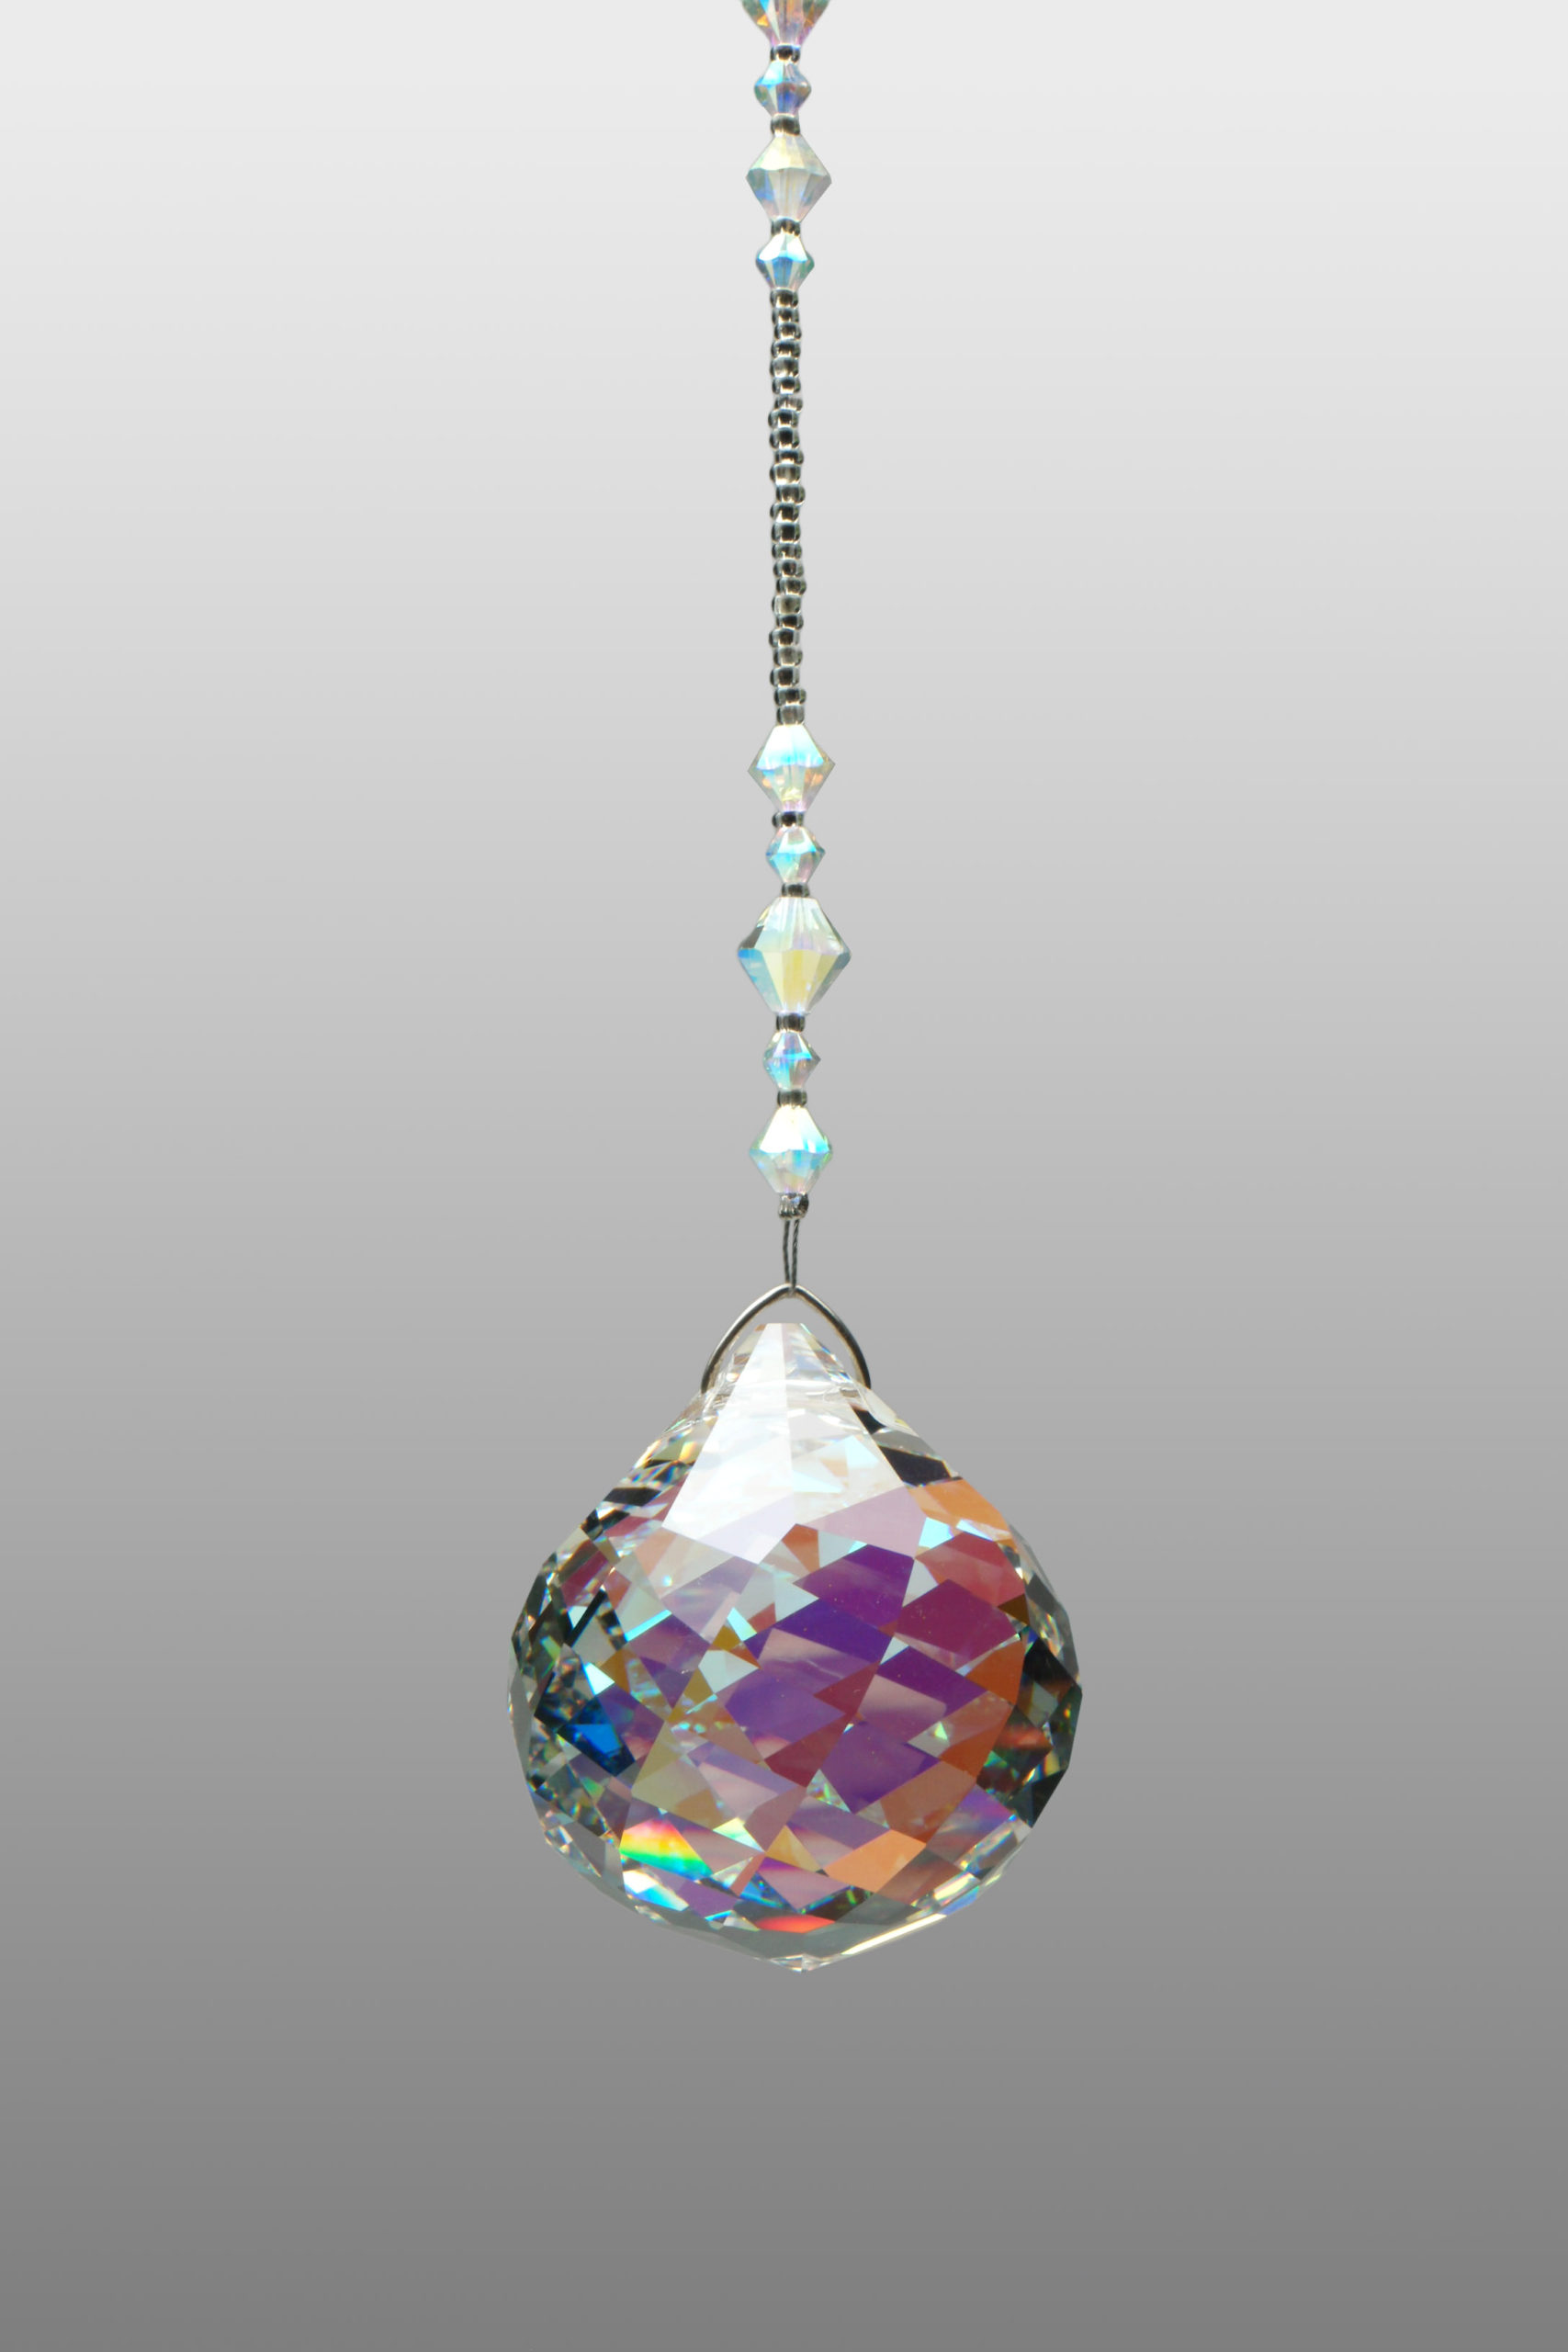 40mm AB twisted faceted ball suncatcher with bead hanger length of your choice